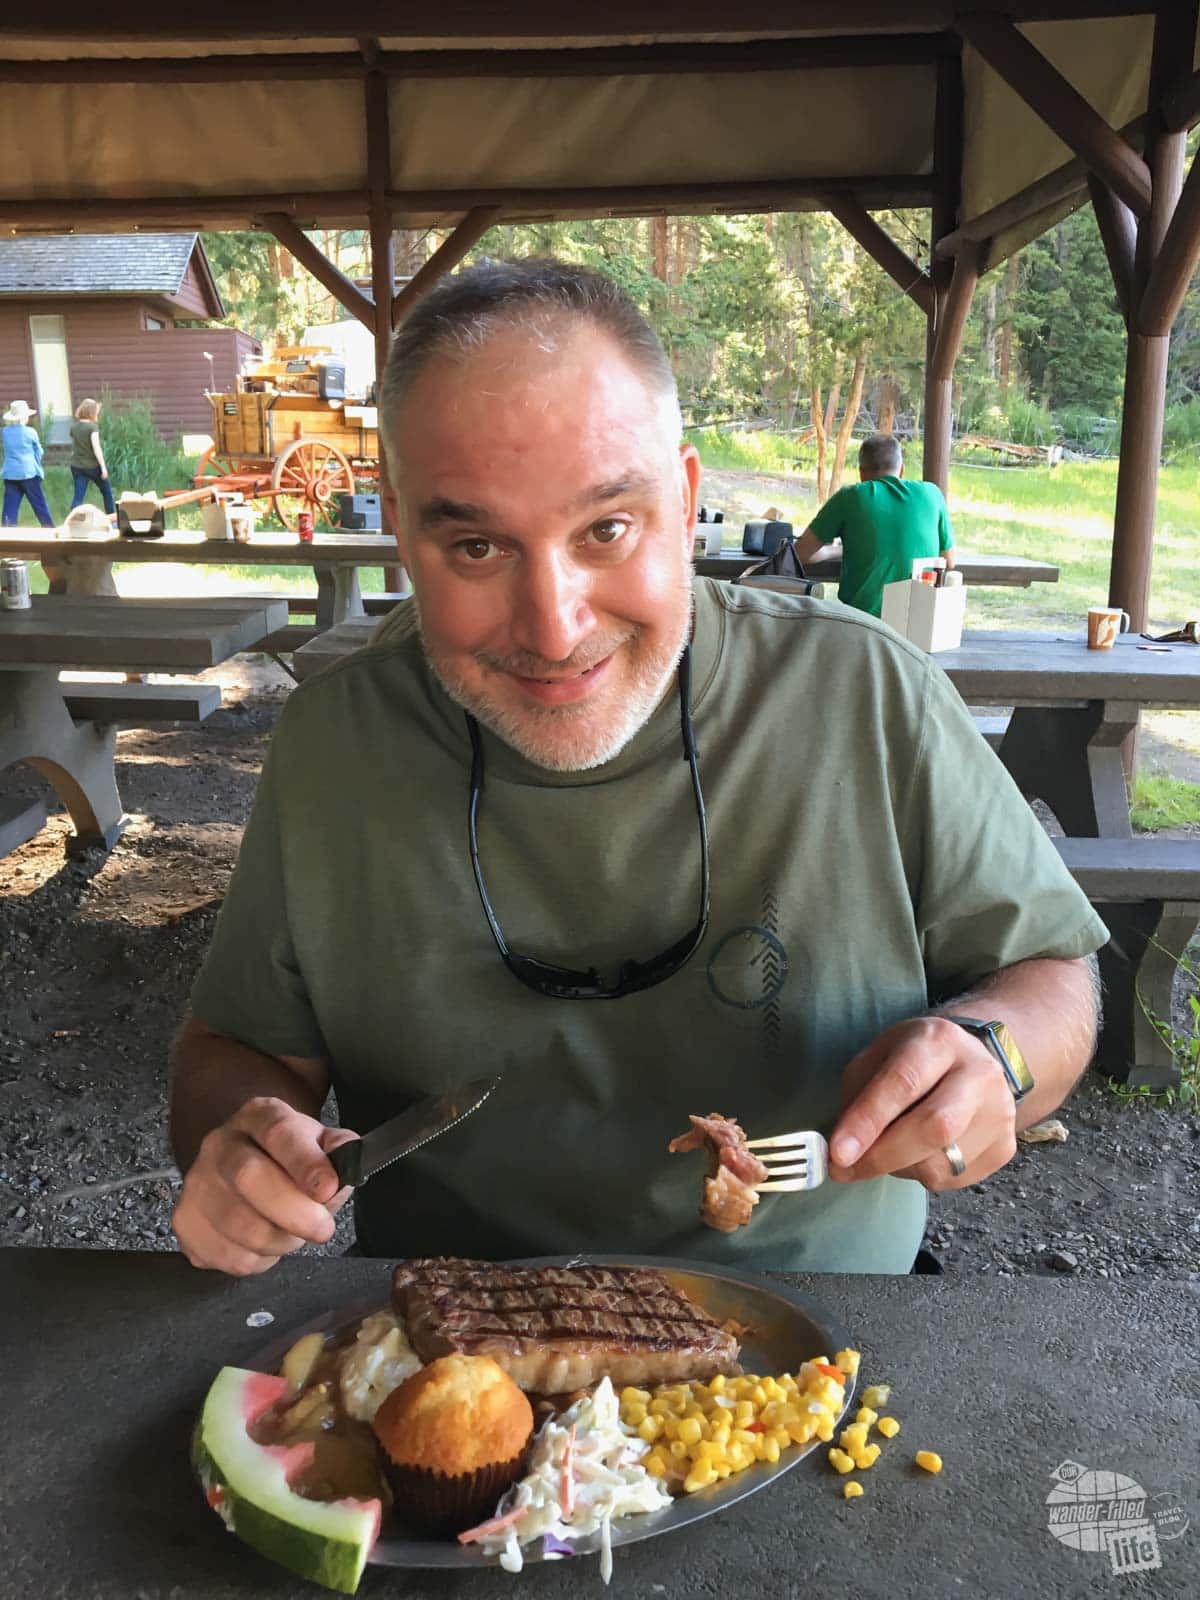 Grant Sinclair enjoying a bite of steak at the Old West Cookout in Yellowstone National Park.